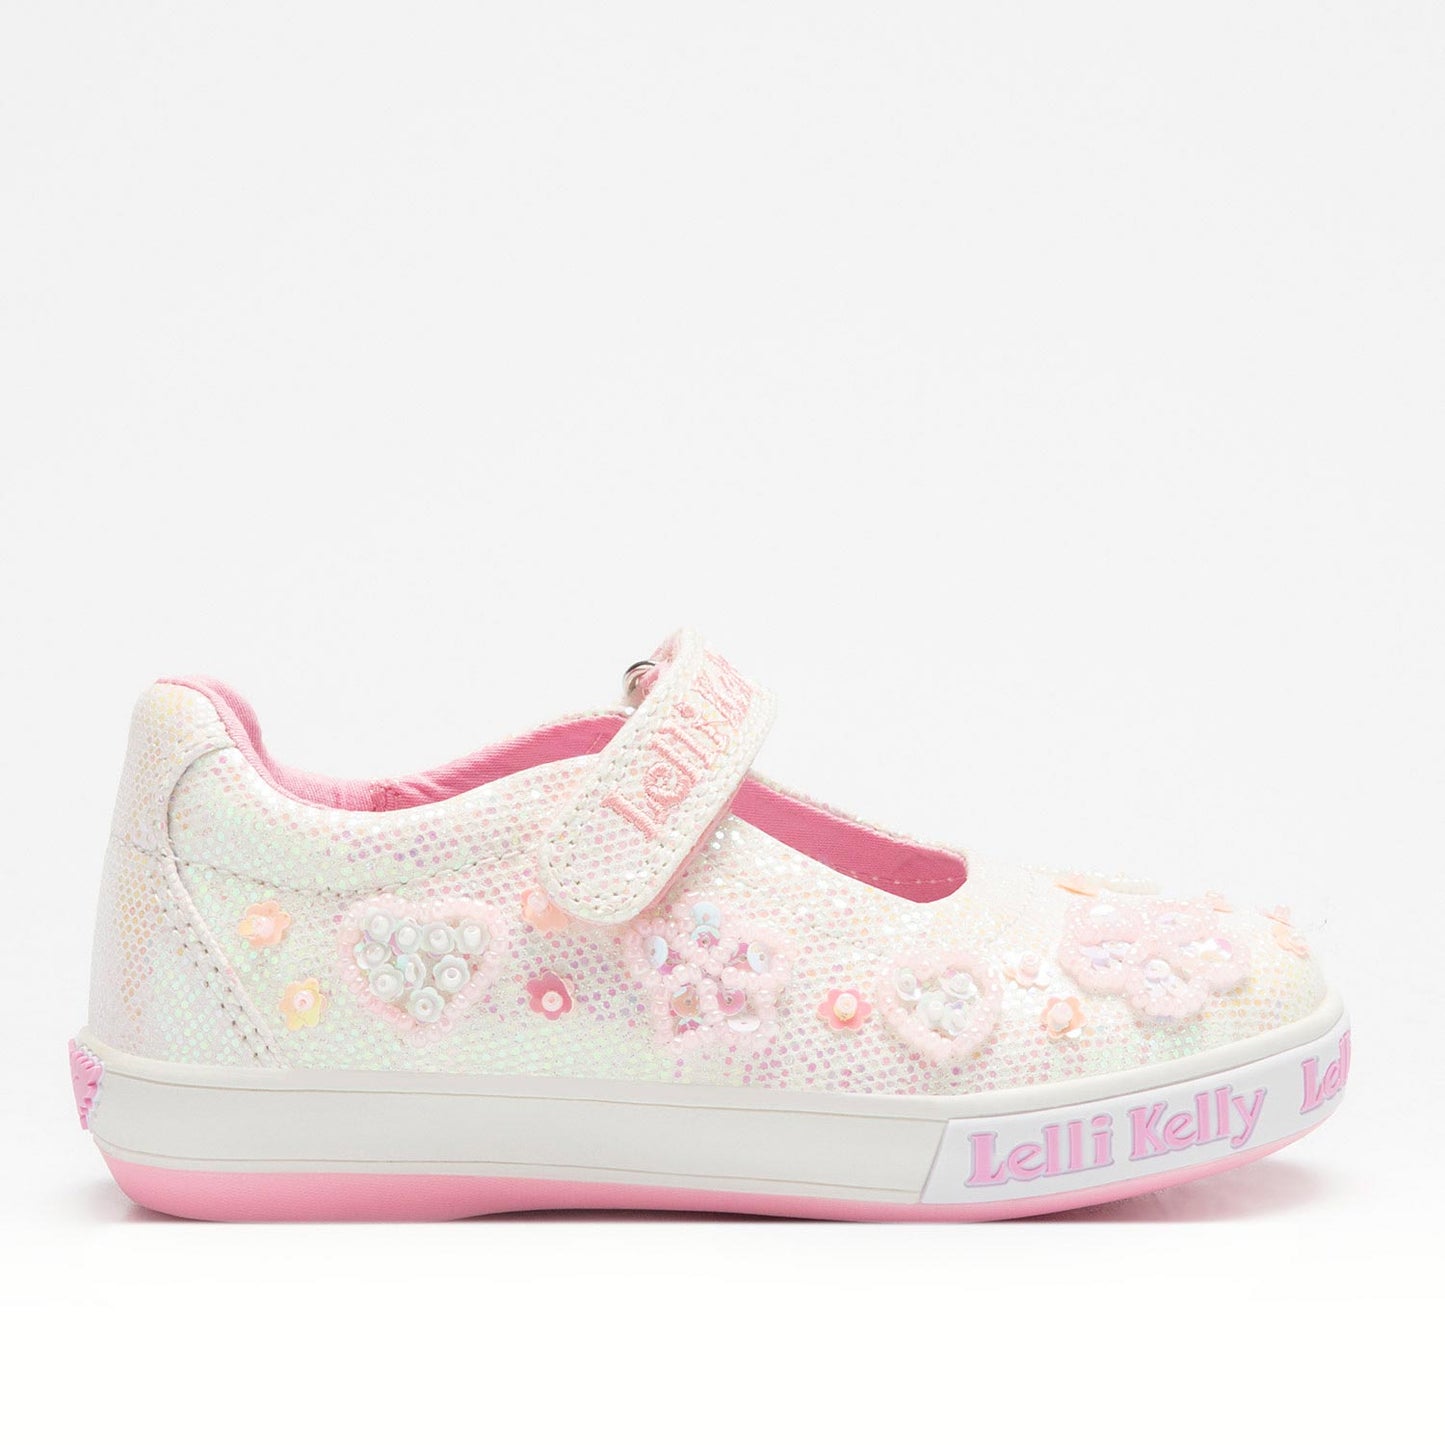 Lelli Kelly Thalia White Heart Canvas Shoes *Preorder May